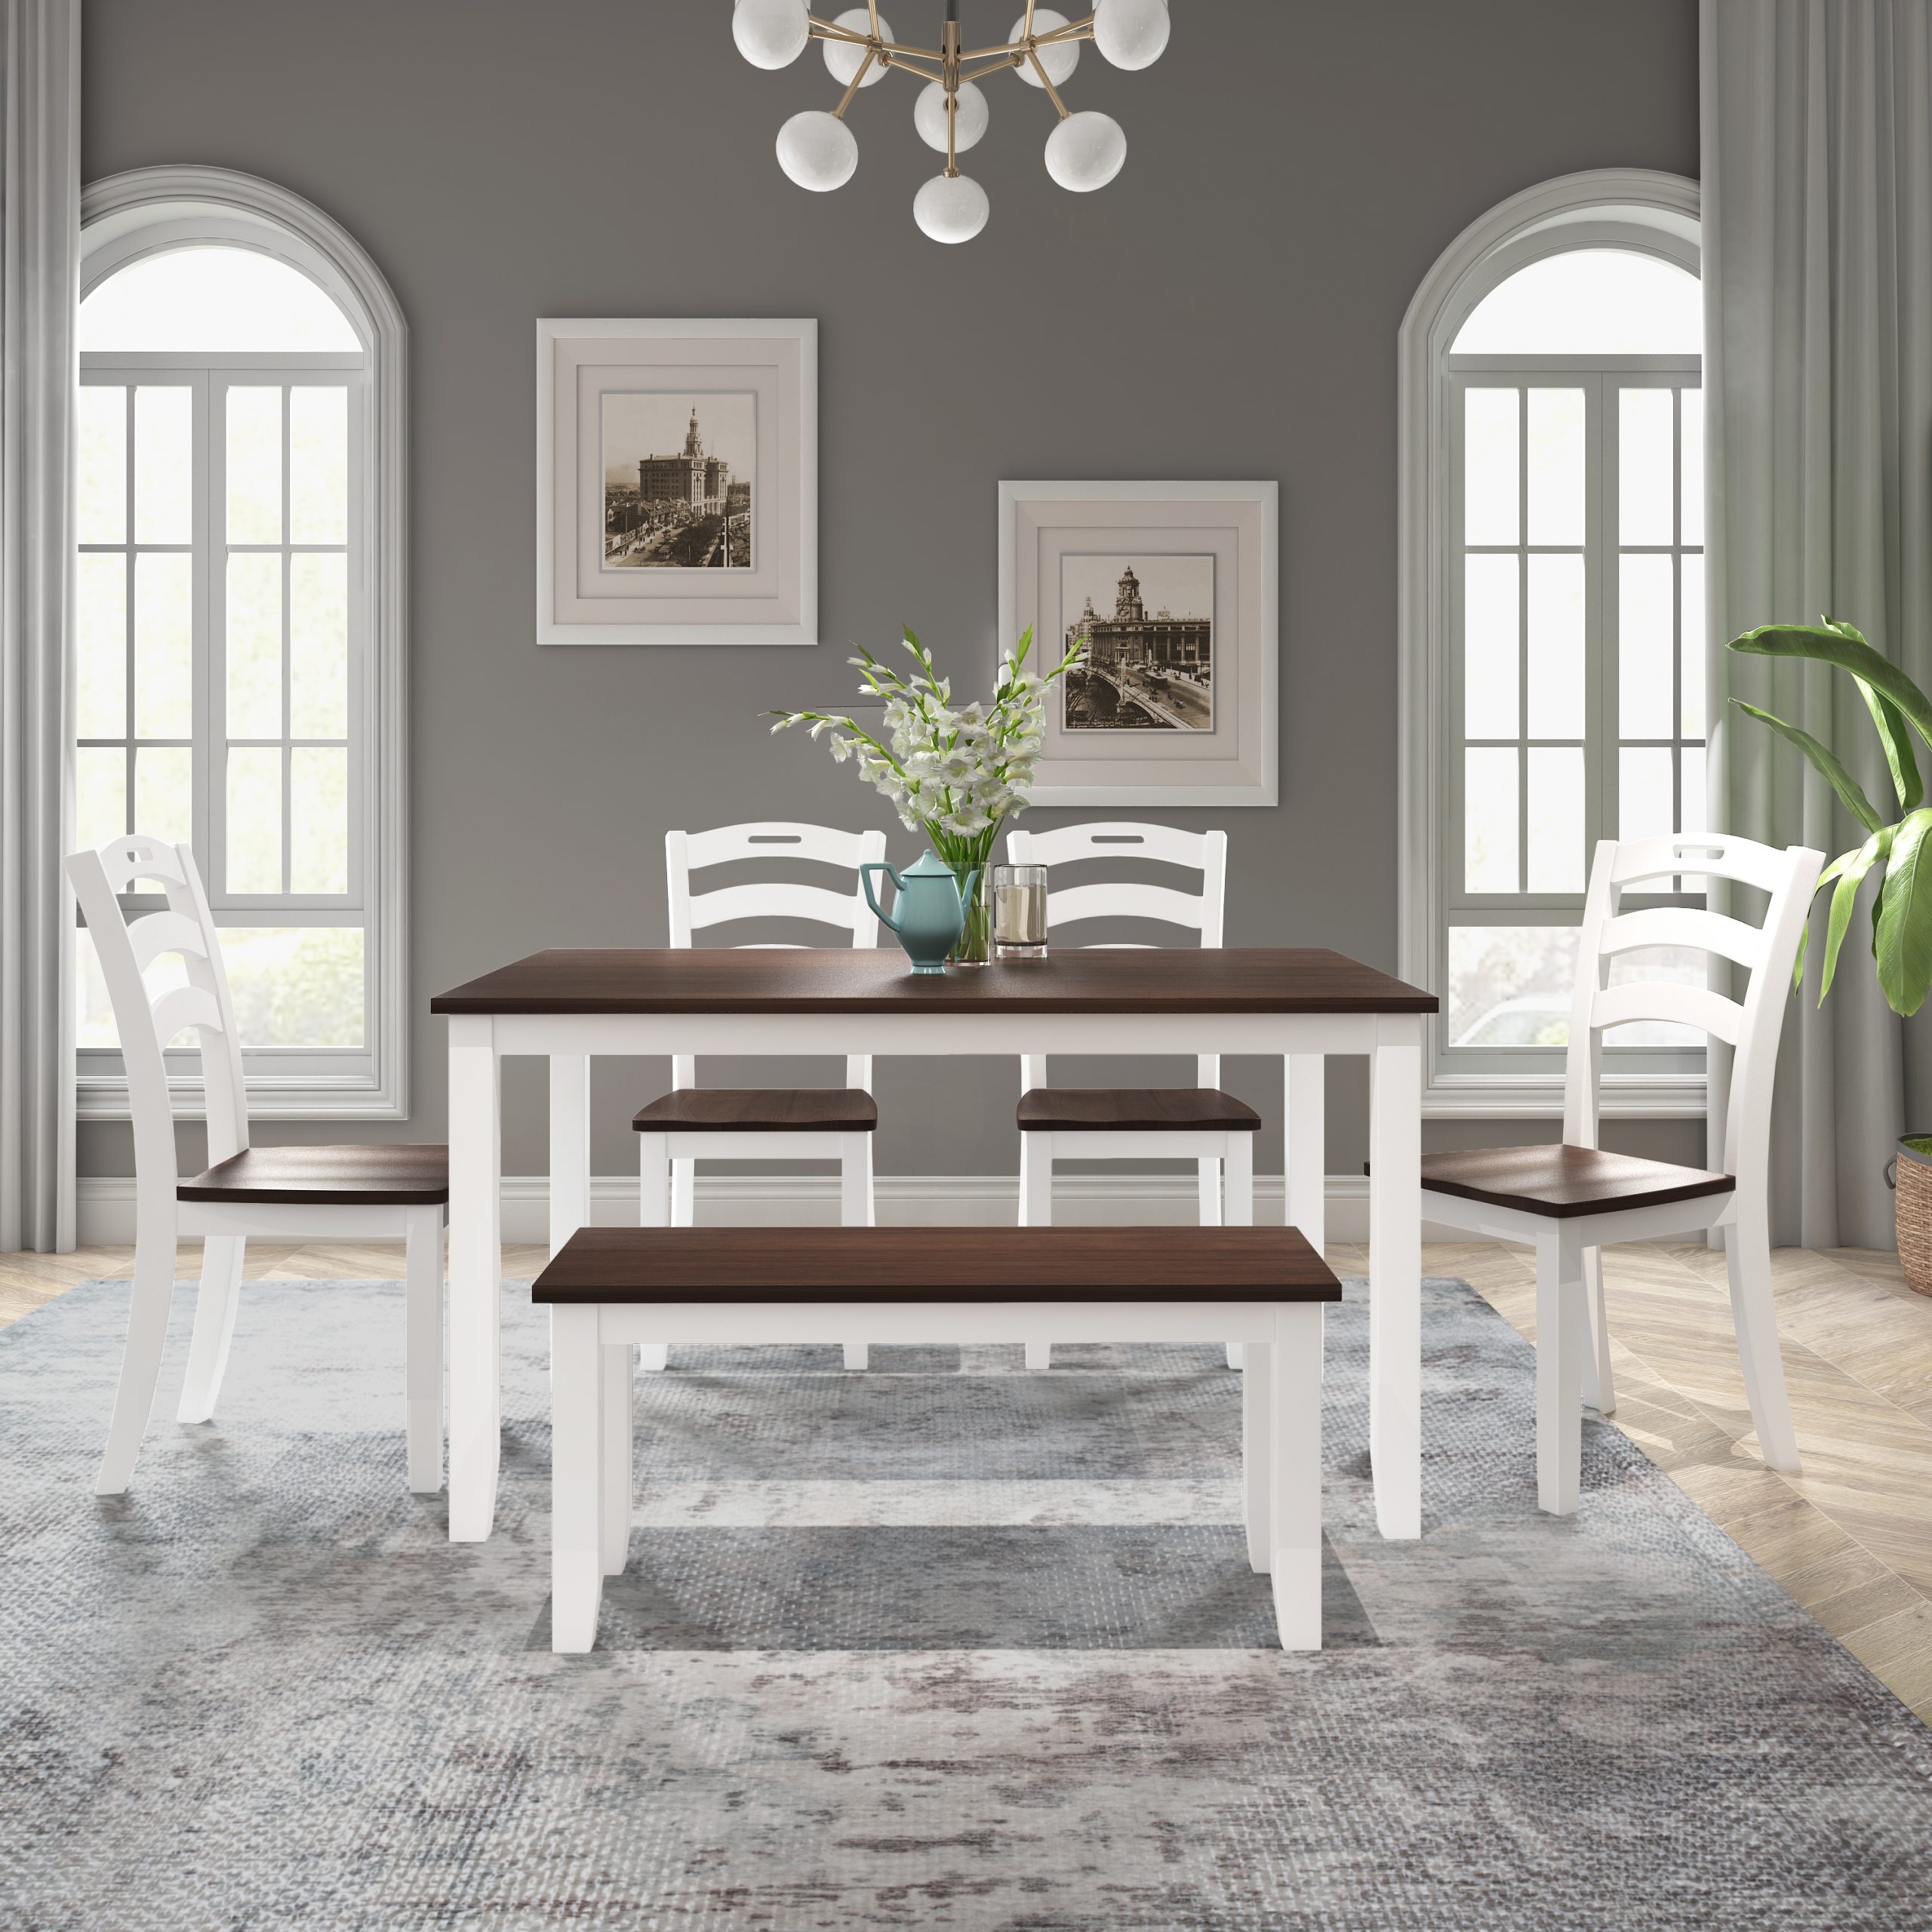 6 Piece Dining Table Set With Bench, Table Set - SH000119AAK